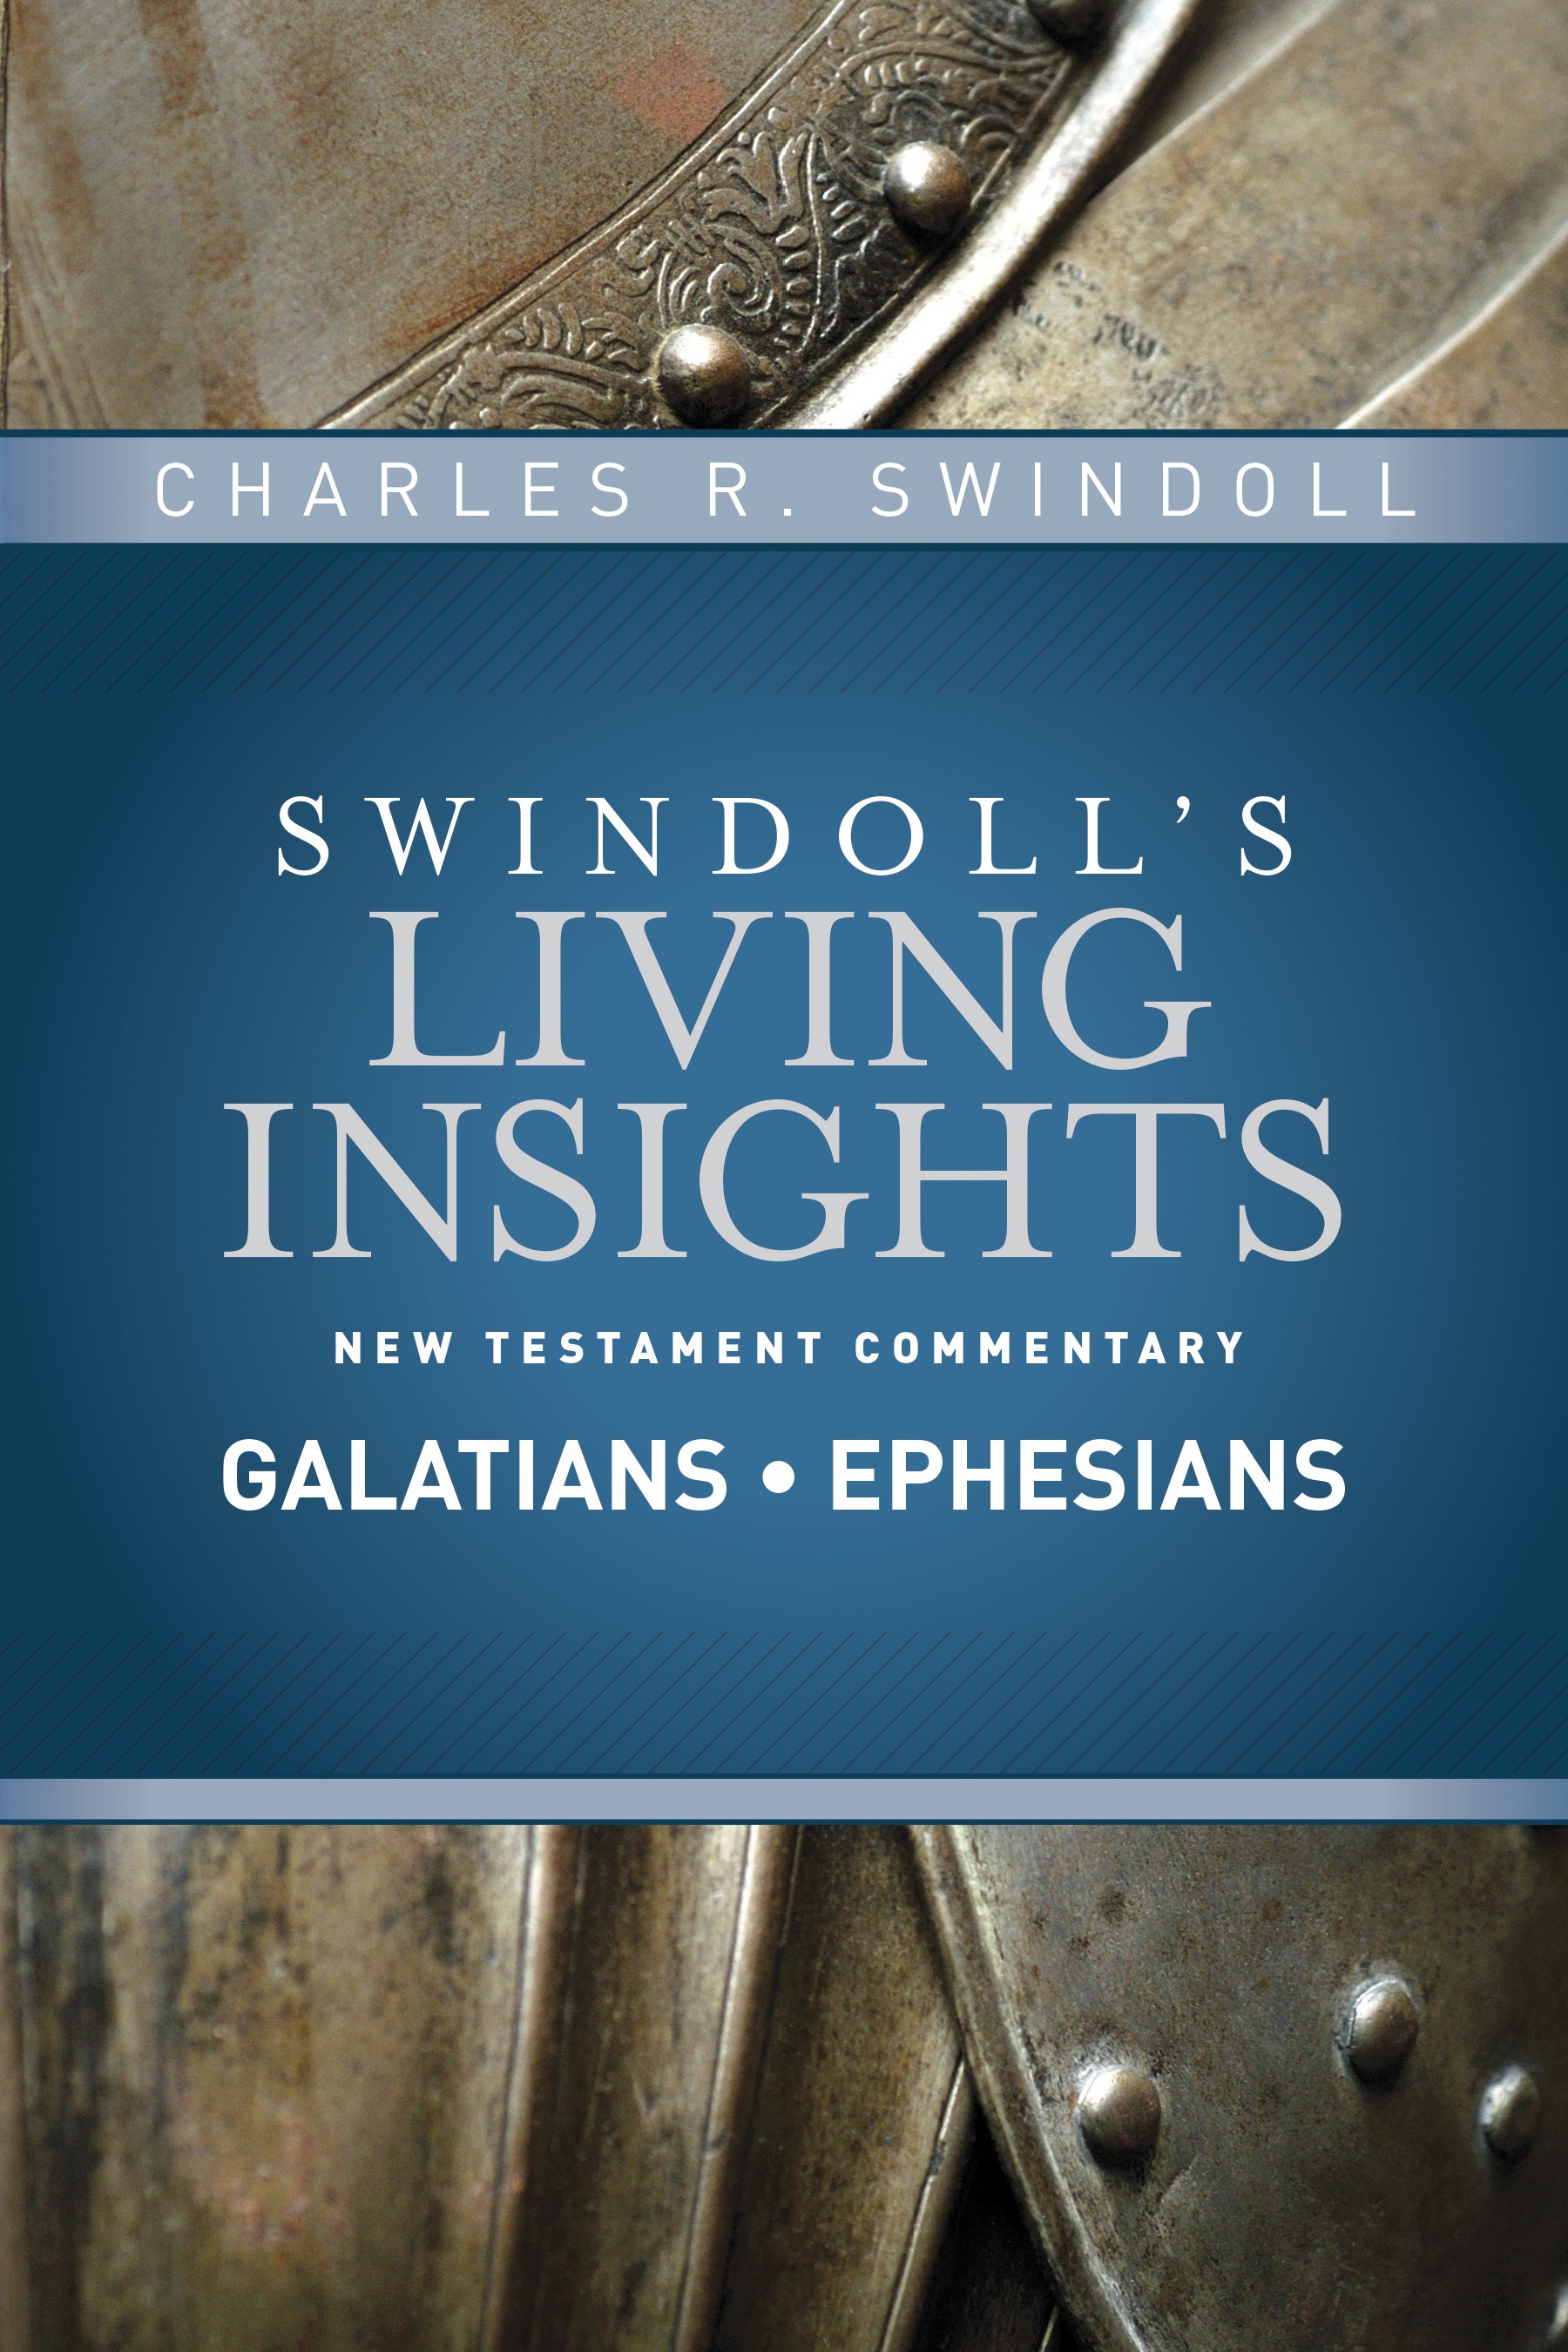 Swindoll's Living Insights New Testament Commentary:  Insights on Galatians, Ephesians